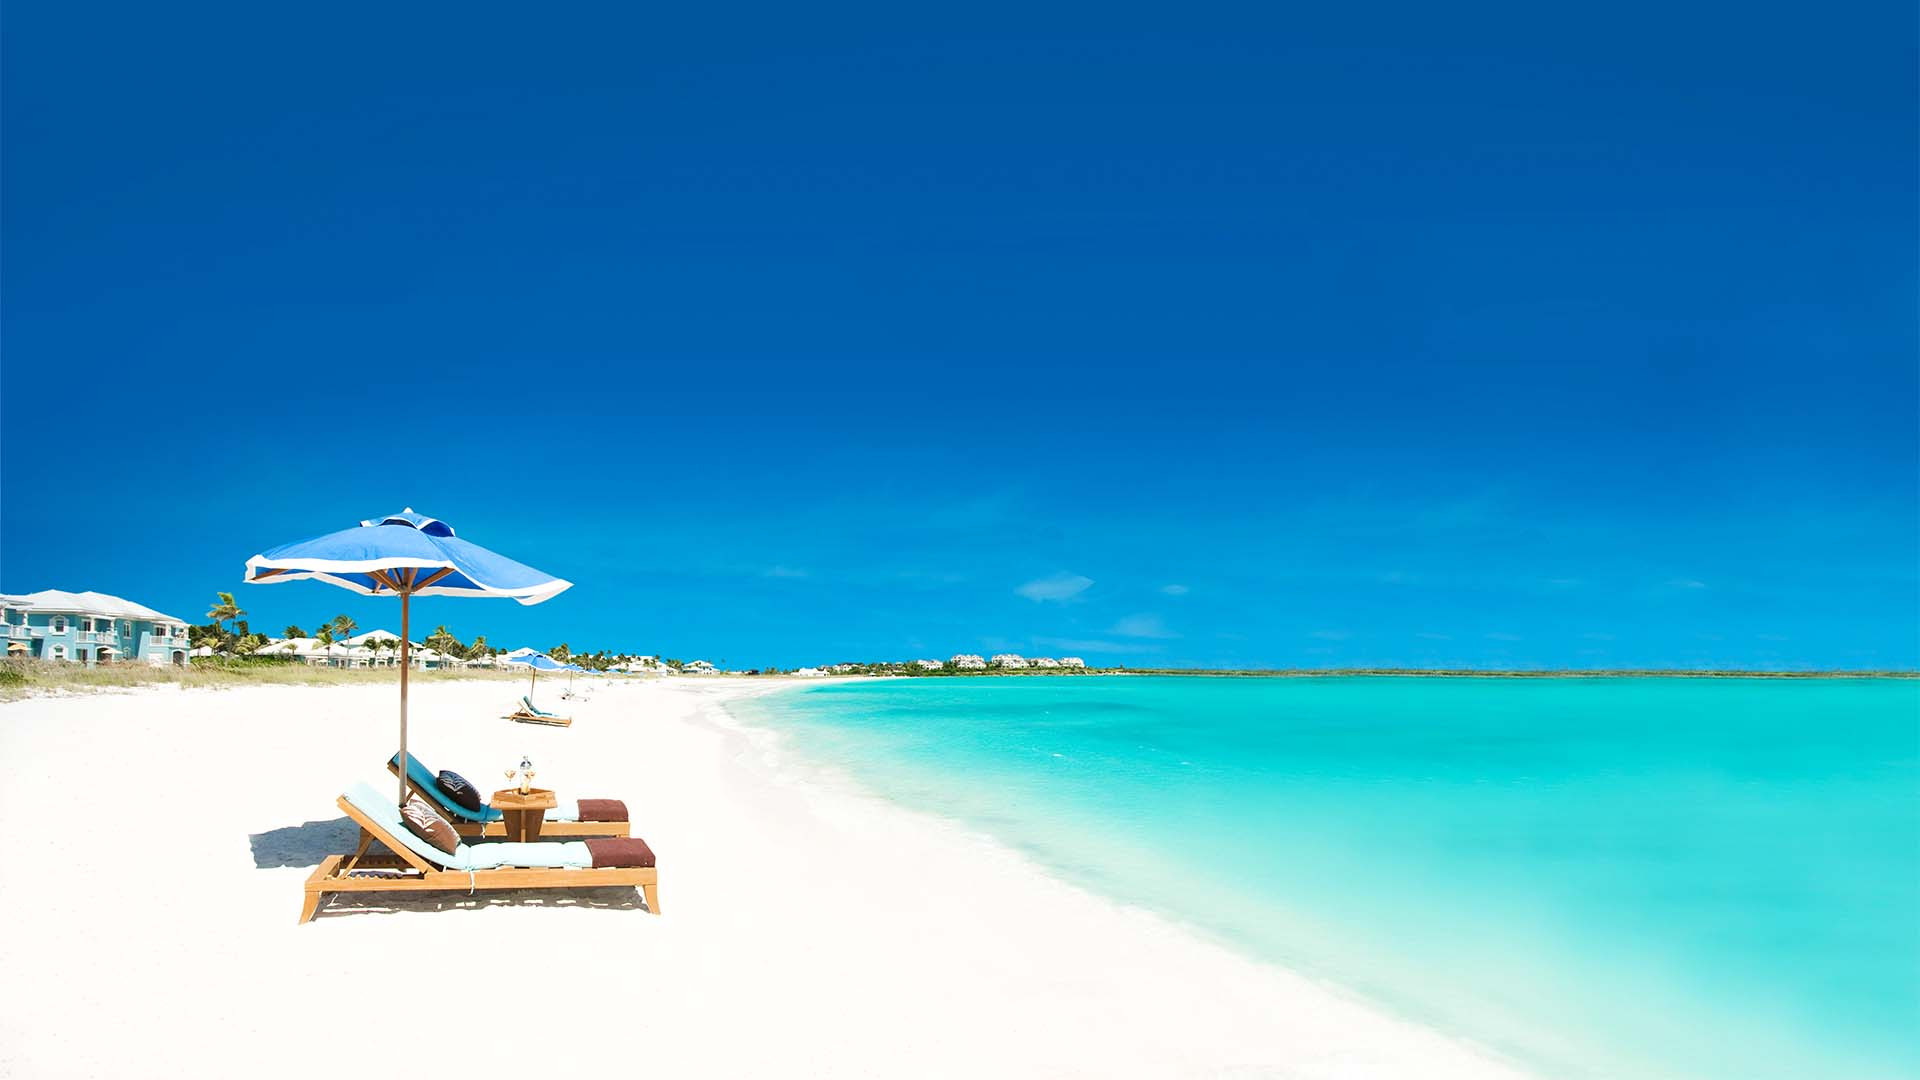 Beach at Sandals resort in the Caribbean